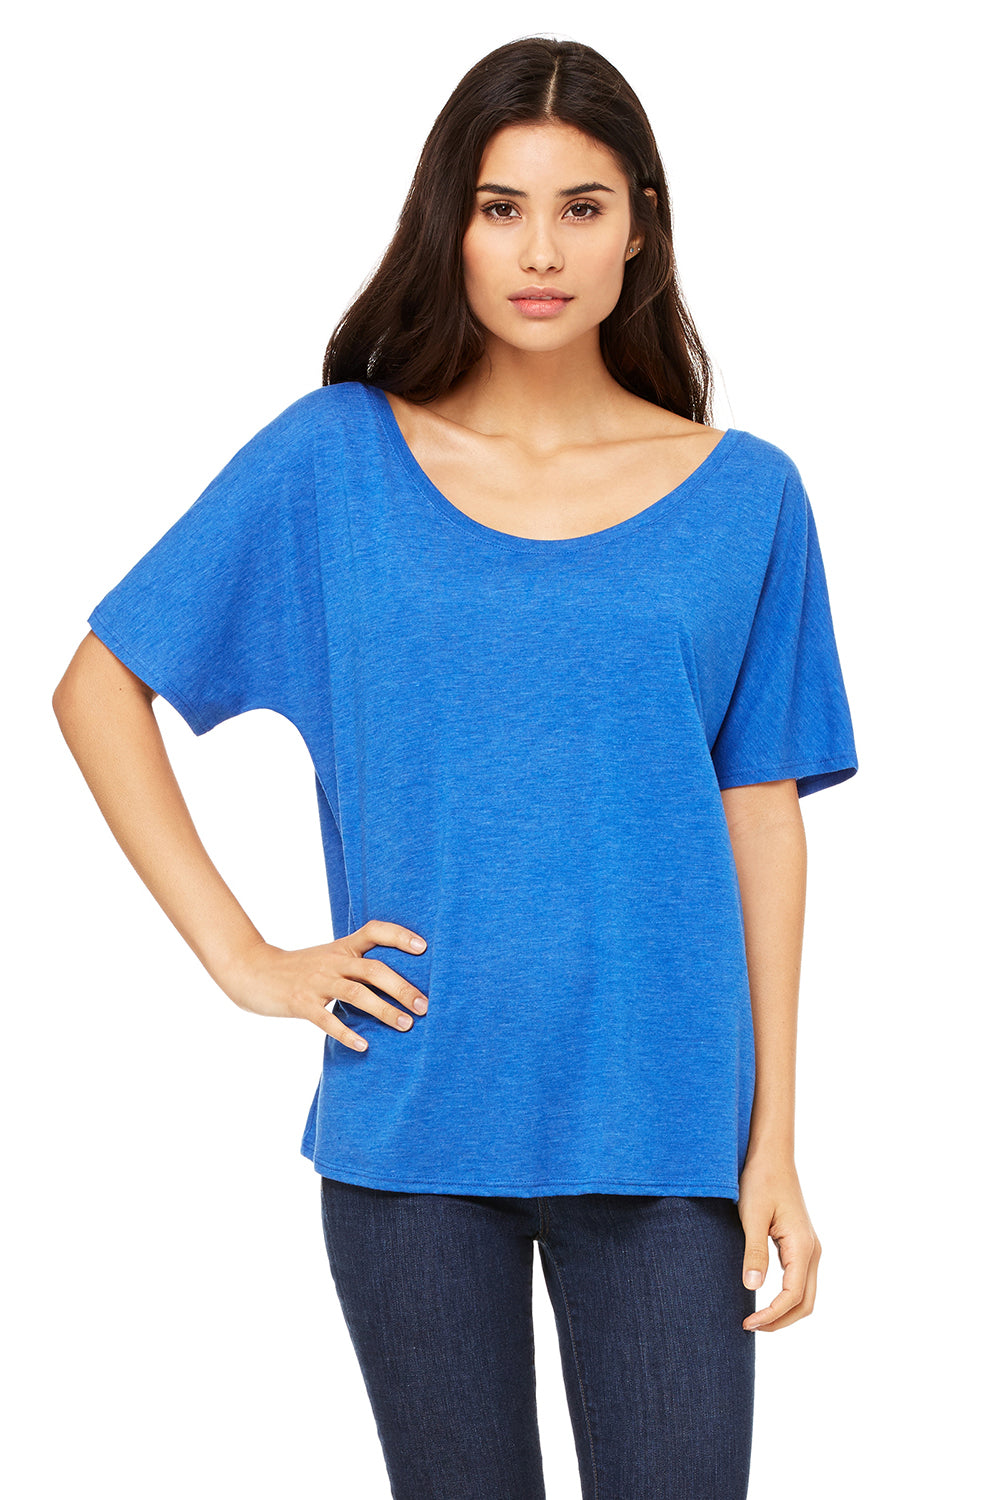 Bella + Canvas 8816 Womens Slouchy Short Sleeve Wide Neck T-Shirt Royal Blue Triblend Front